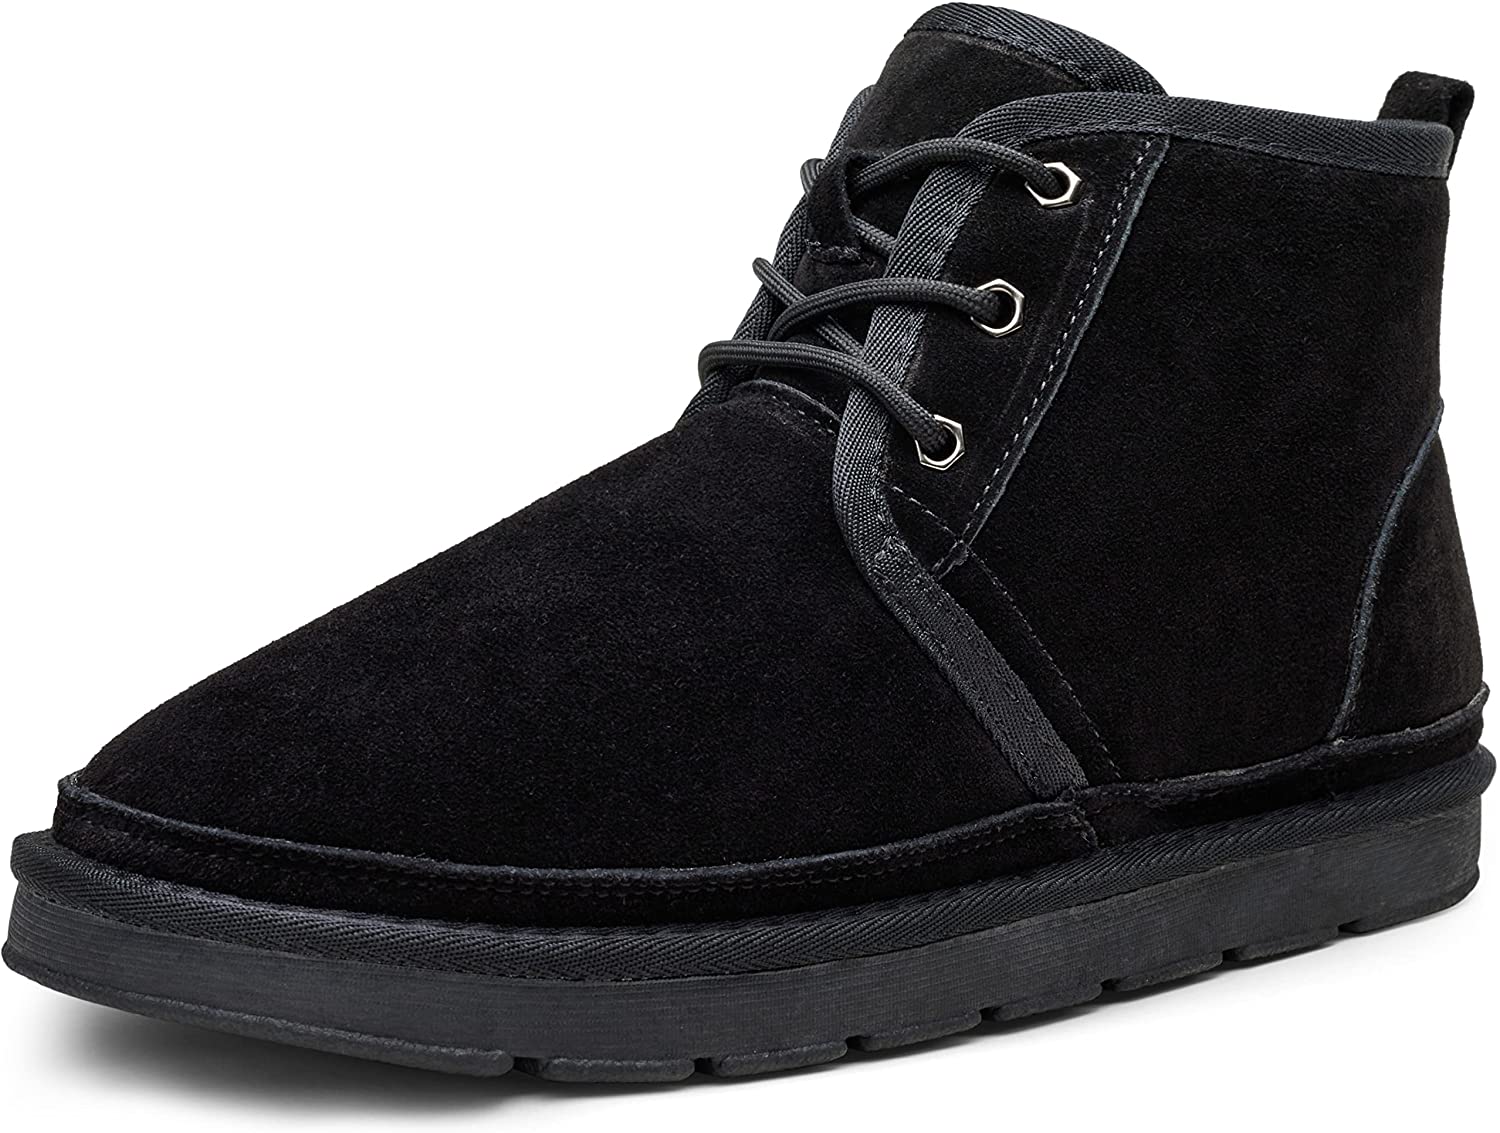 Jousen Men's Winter Boots Suede Leather Snow Boots for Men Warm Fur Chukka  Boots